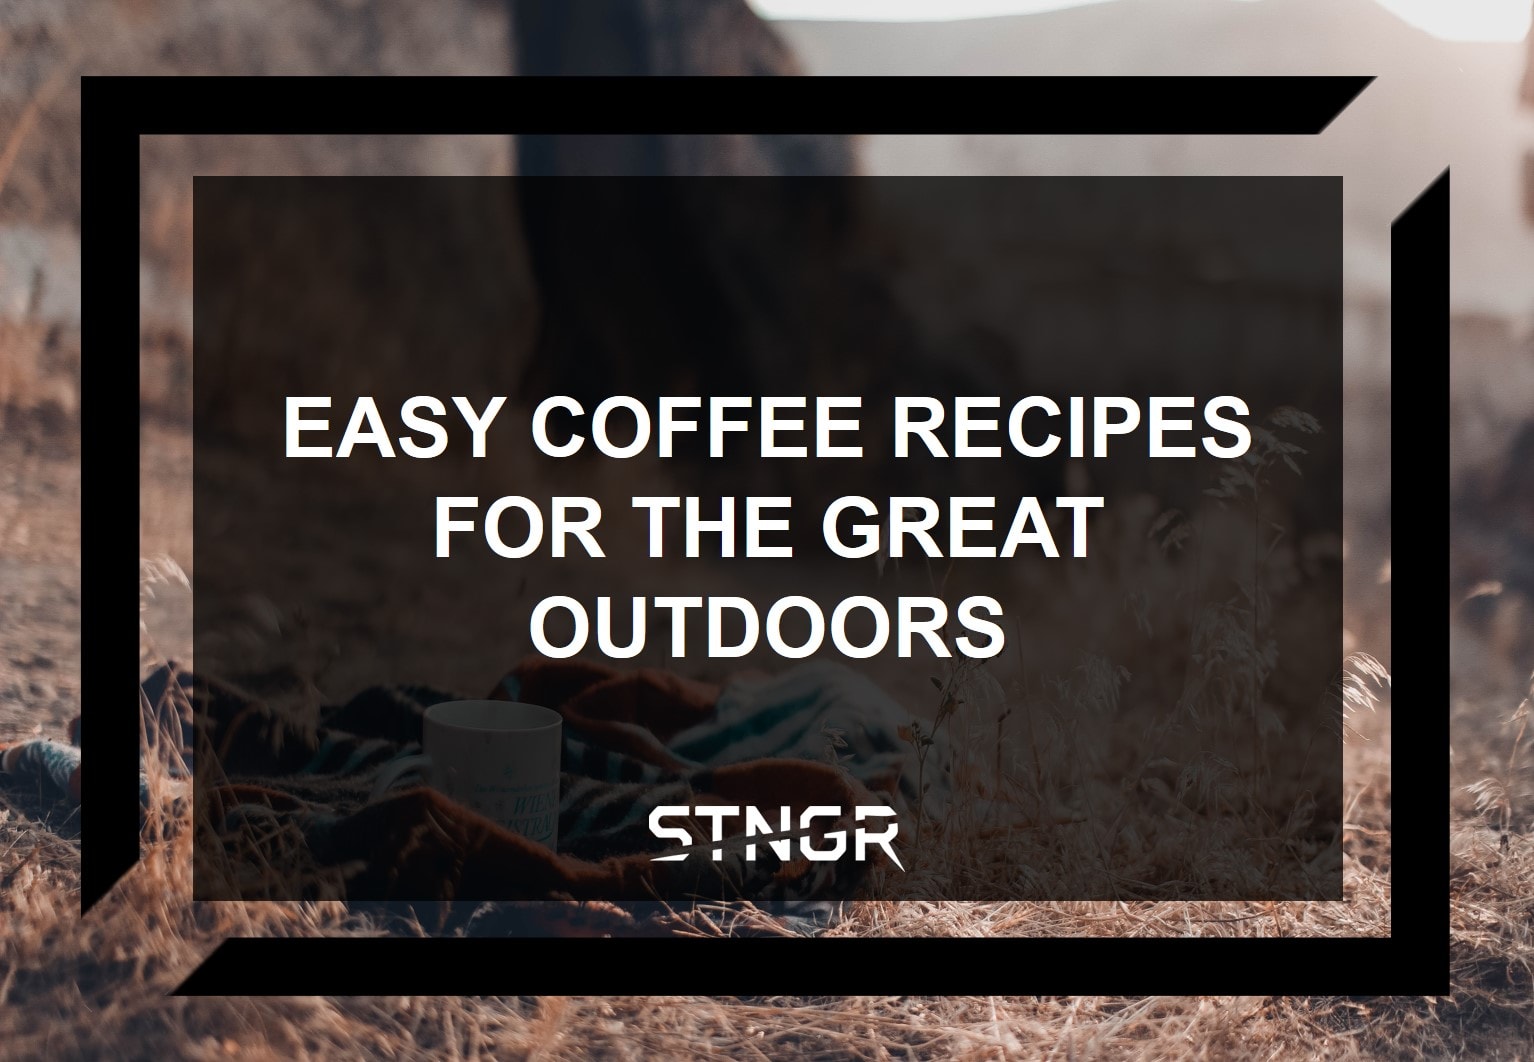 Easy Coffee Recipes for the Great Outdoors